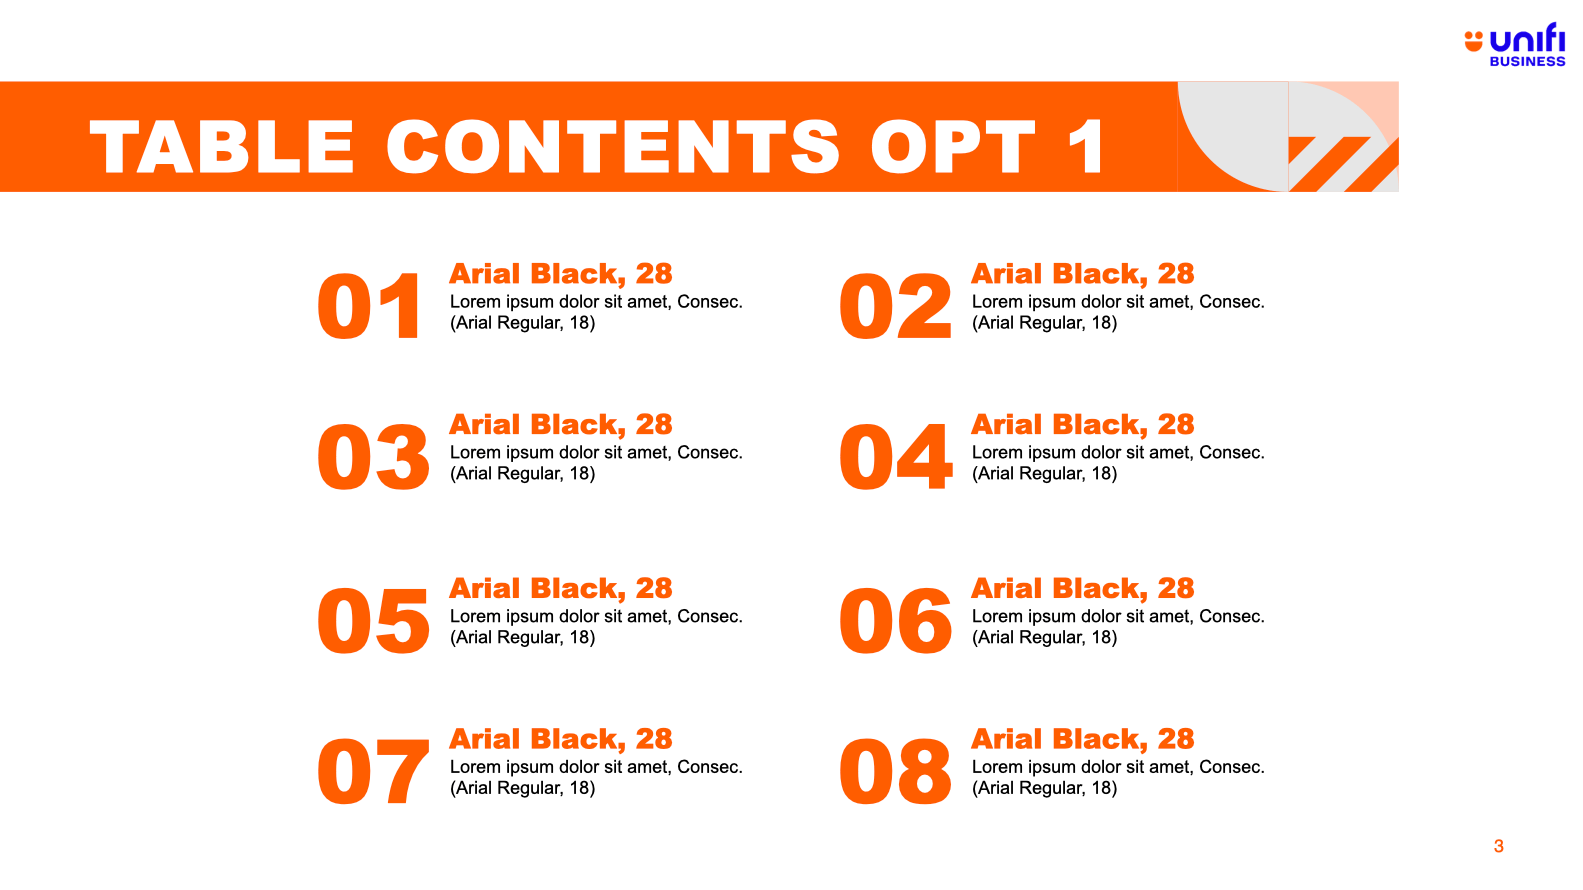 Unifi Business TOC without image